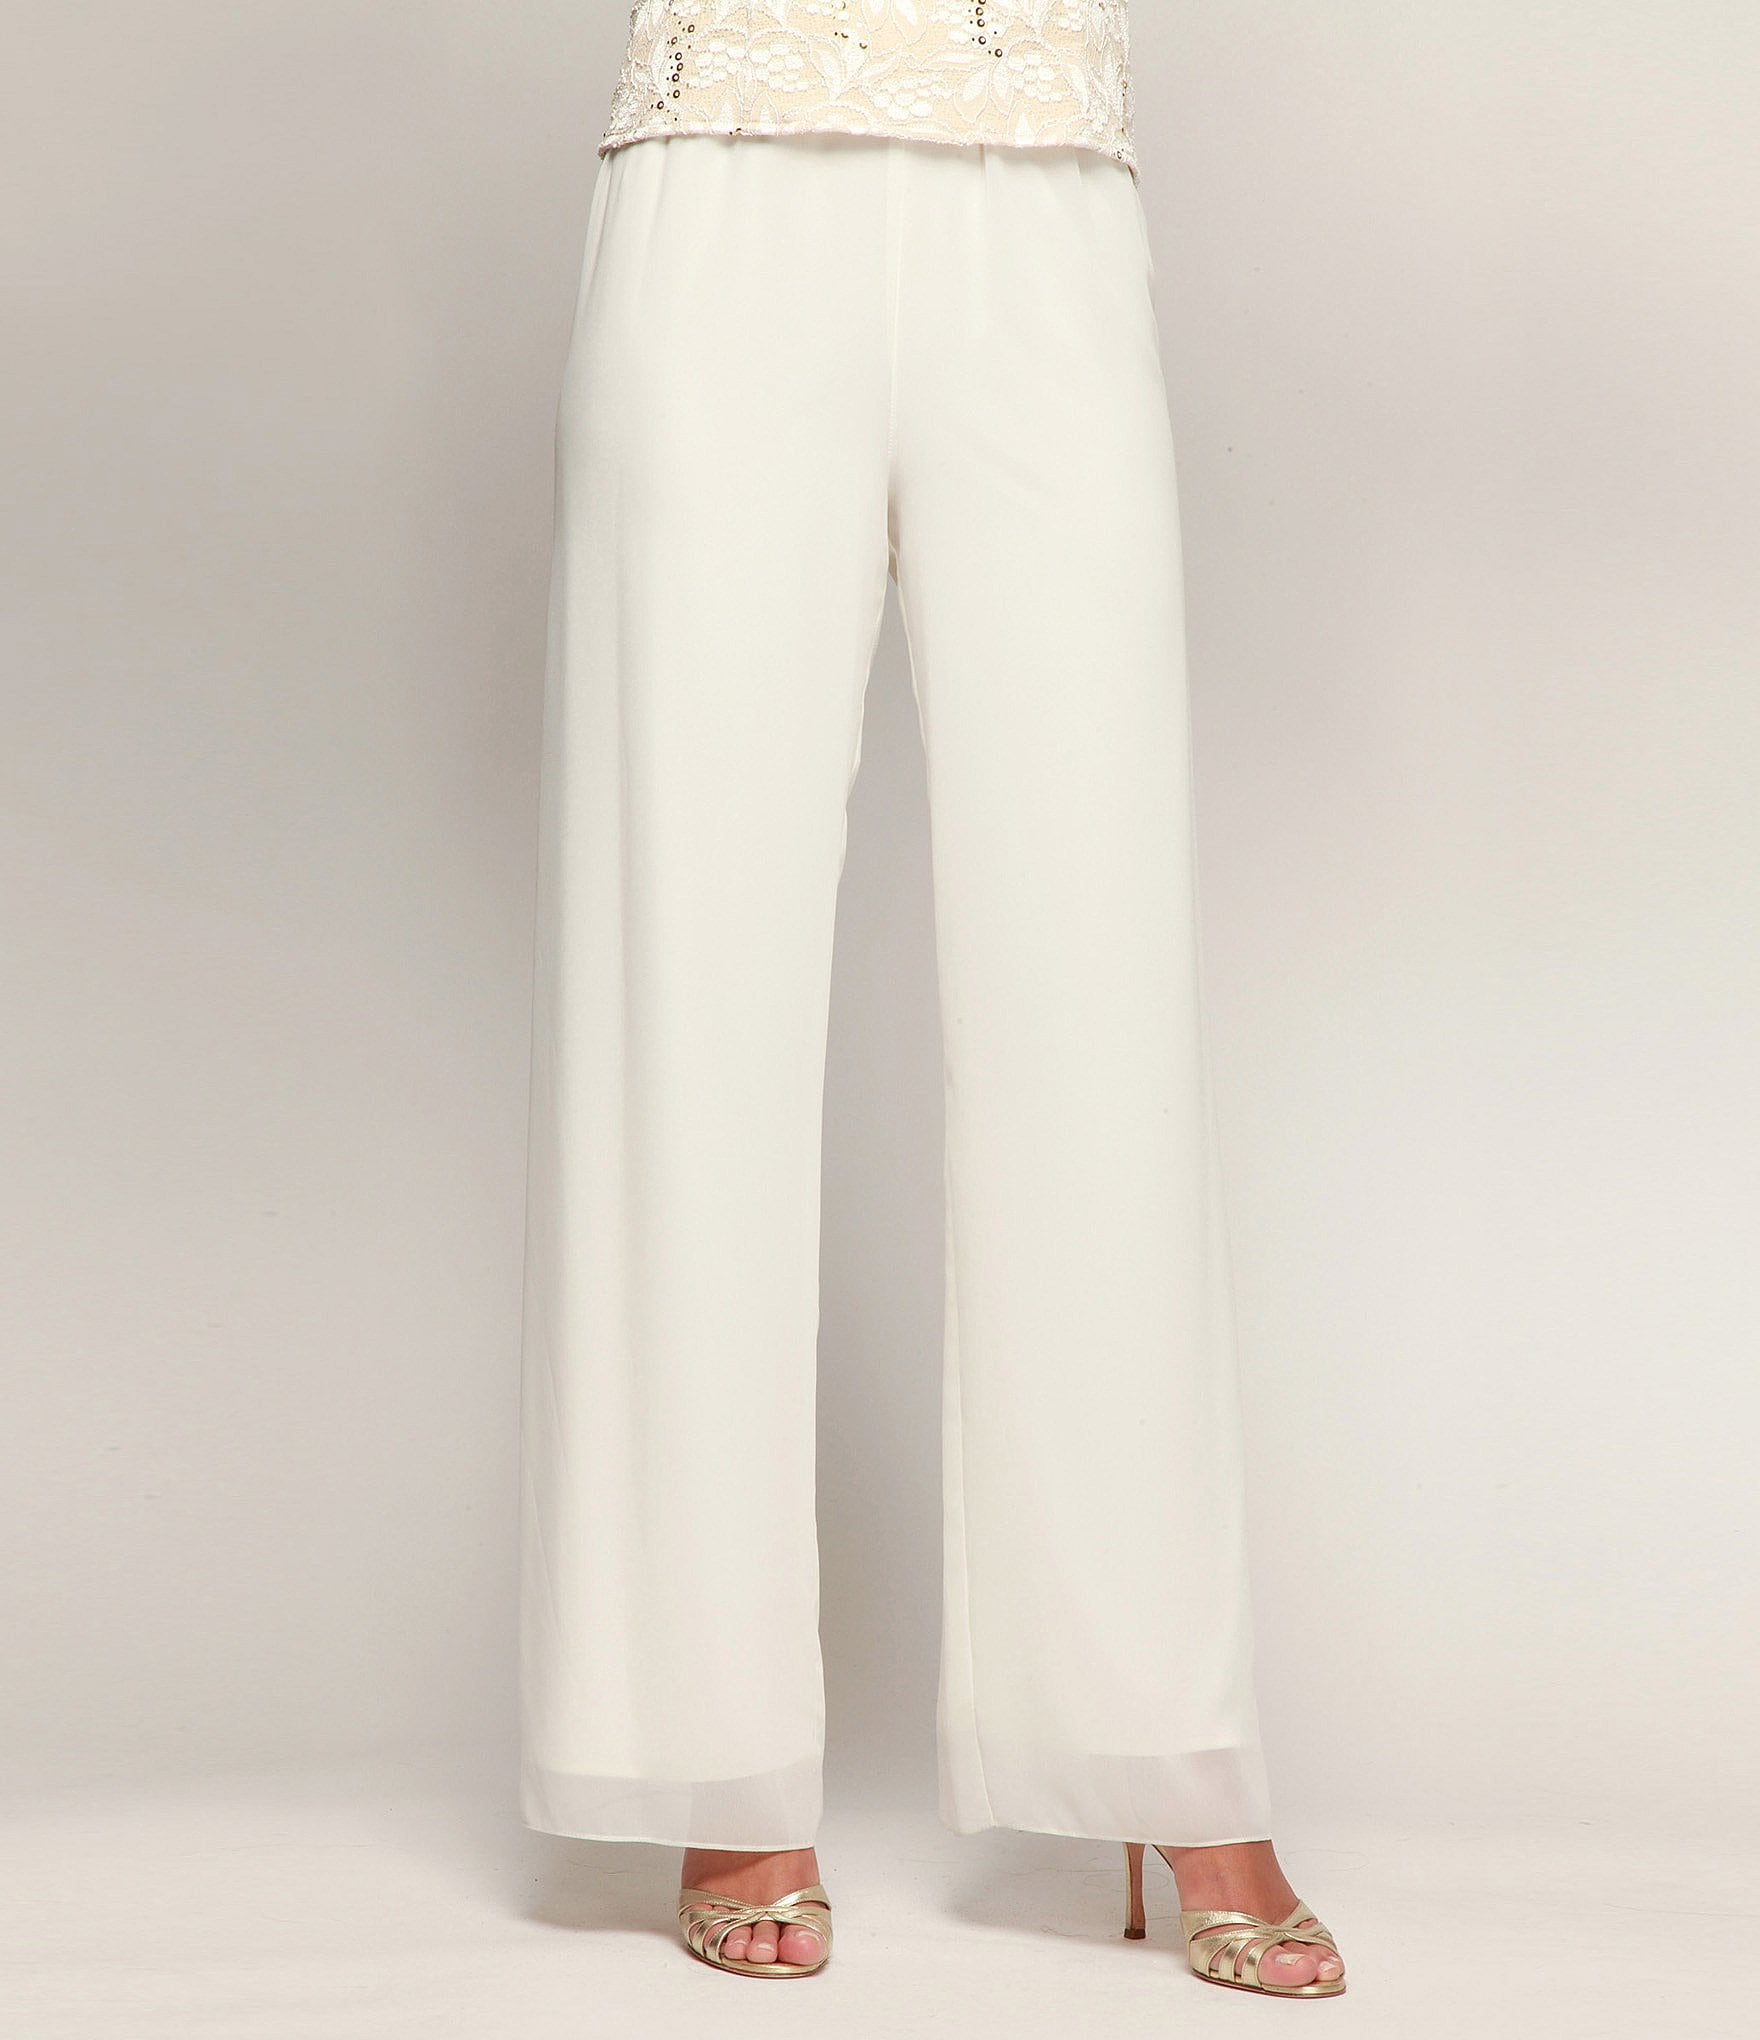 Trousers at Curvy Palace in Chiffon